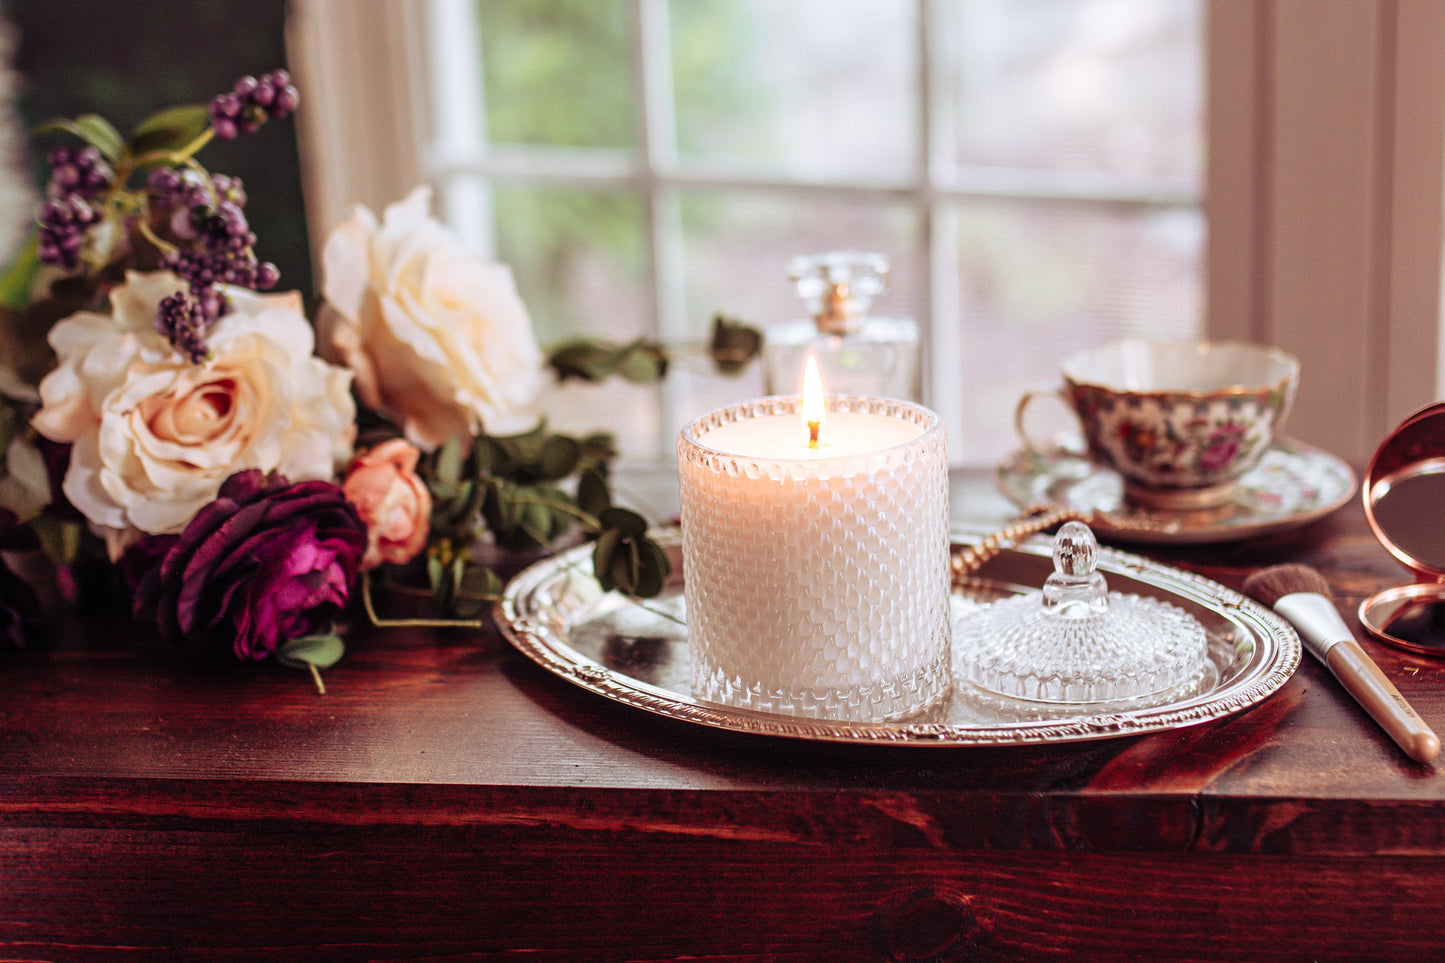 Soy Candle in Vintage Style Candy Dish